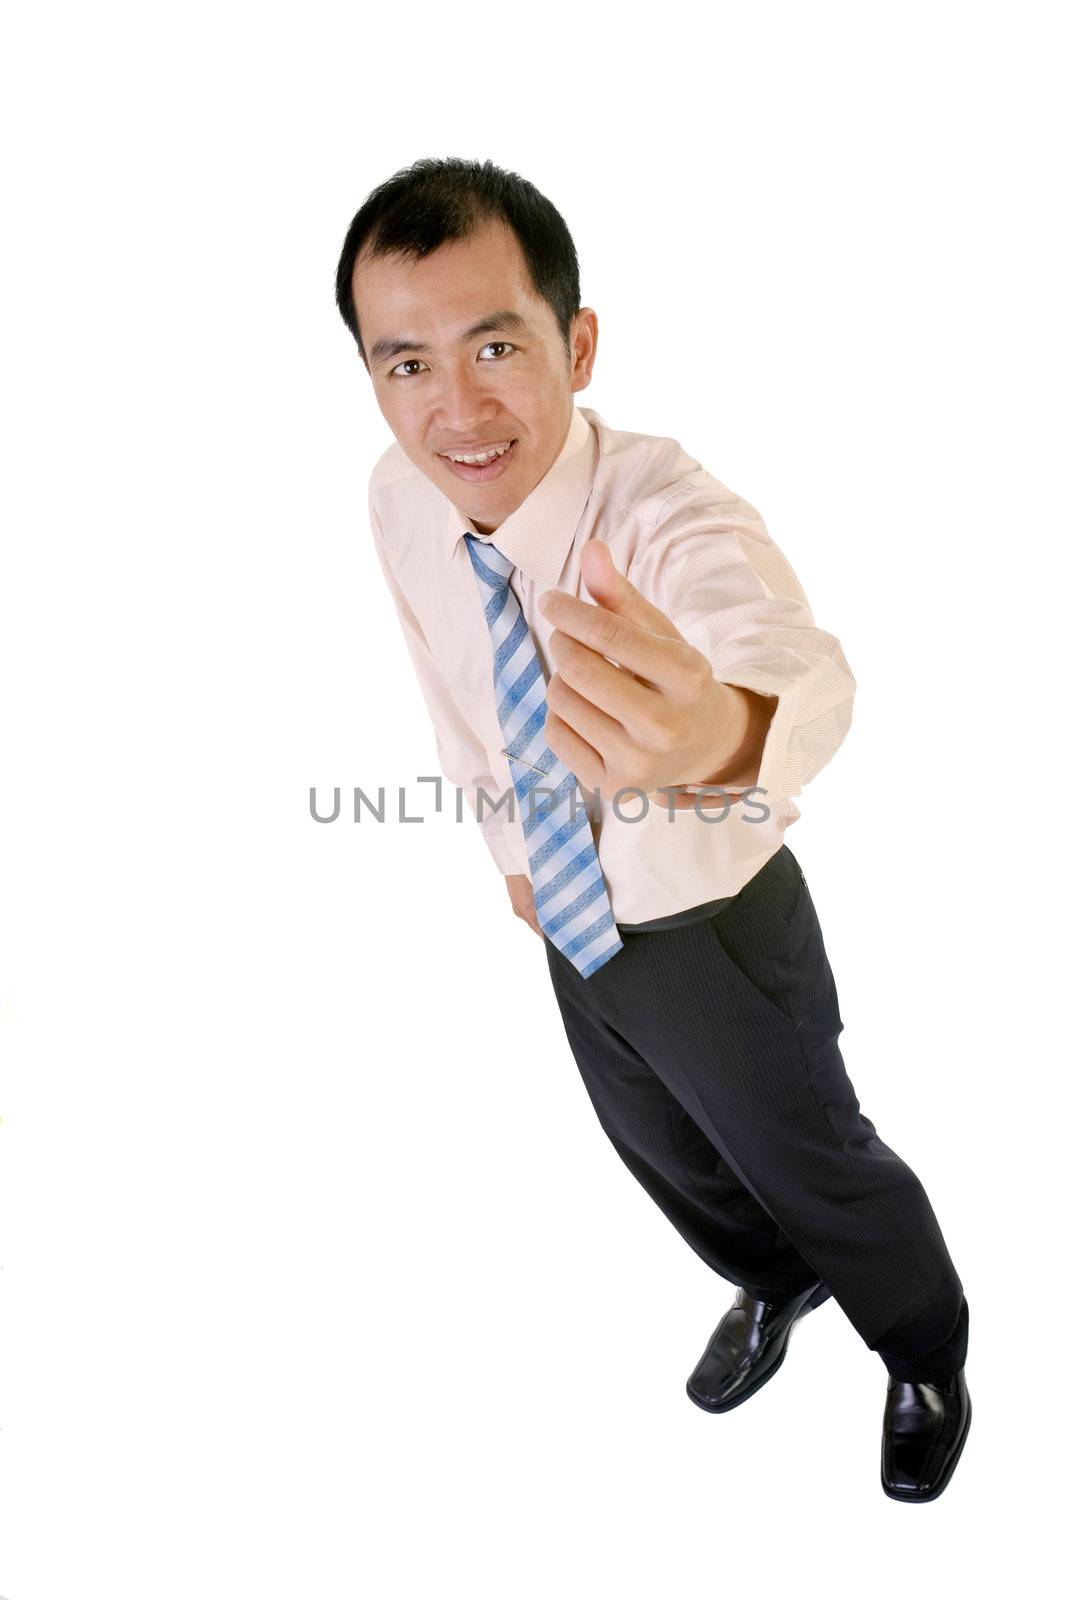 Smiling Asian businessman portrait with gesture standing on white background.